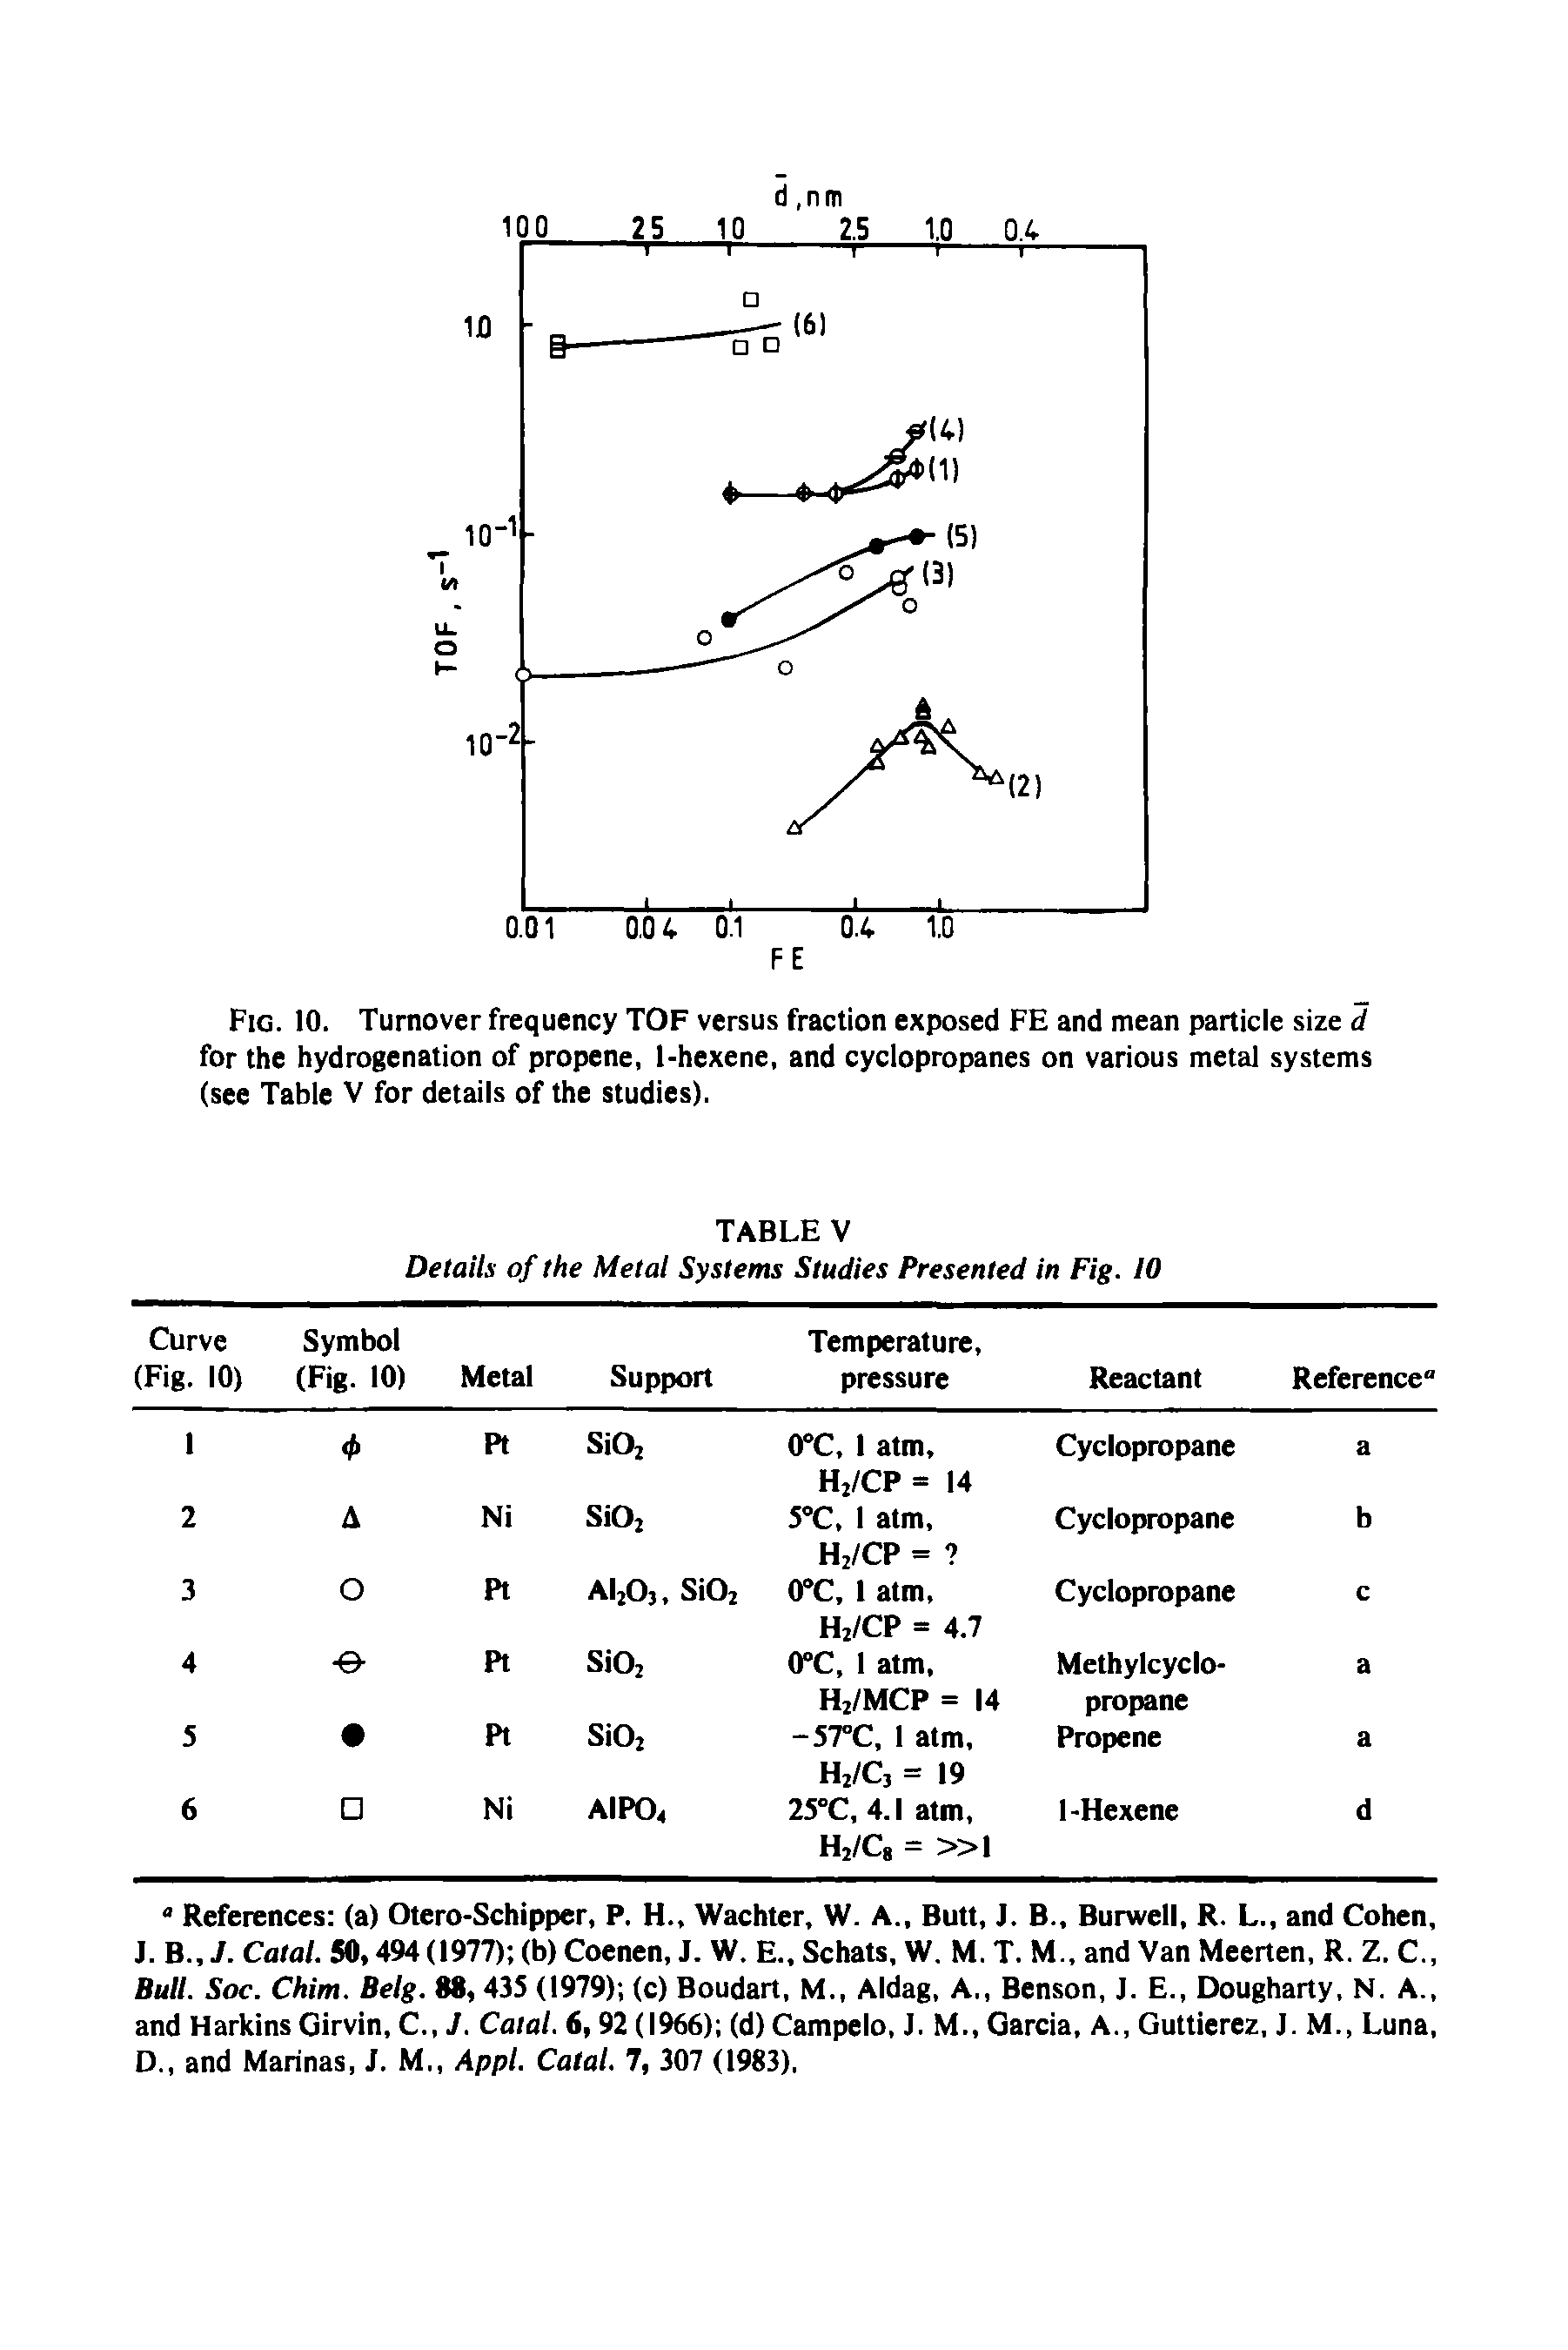 Fig. 10. Turnover frequency TOF versus fraction exposed FE and mean particle size d for the hydrogenation of propene, 1-hexene, and cyclopropanes on various metal systems (see Table V for details of the studies).